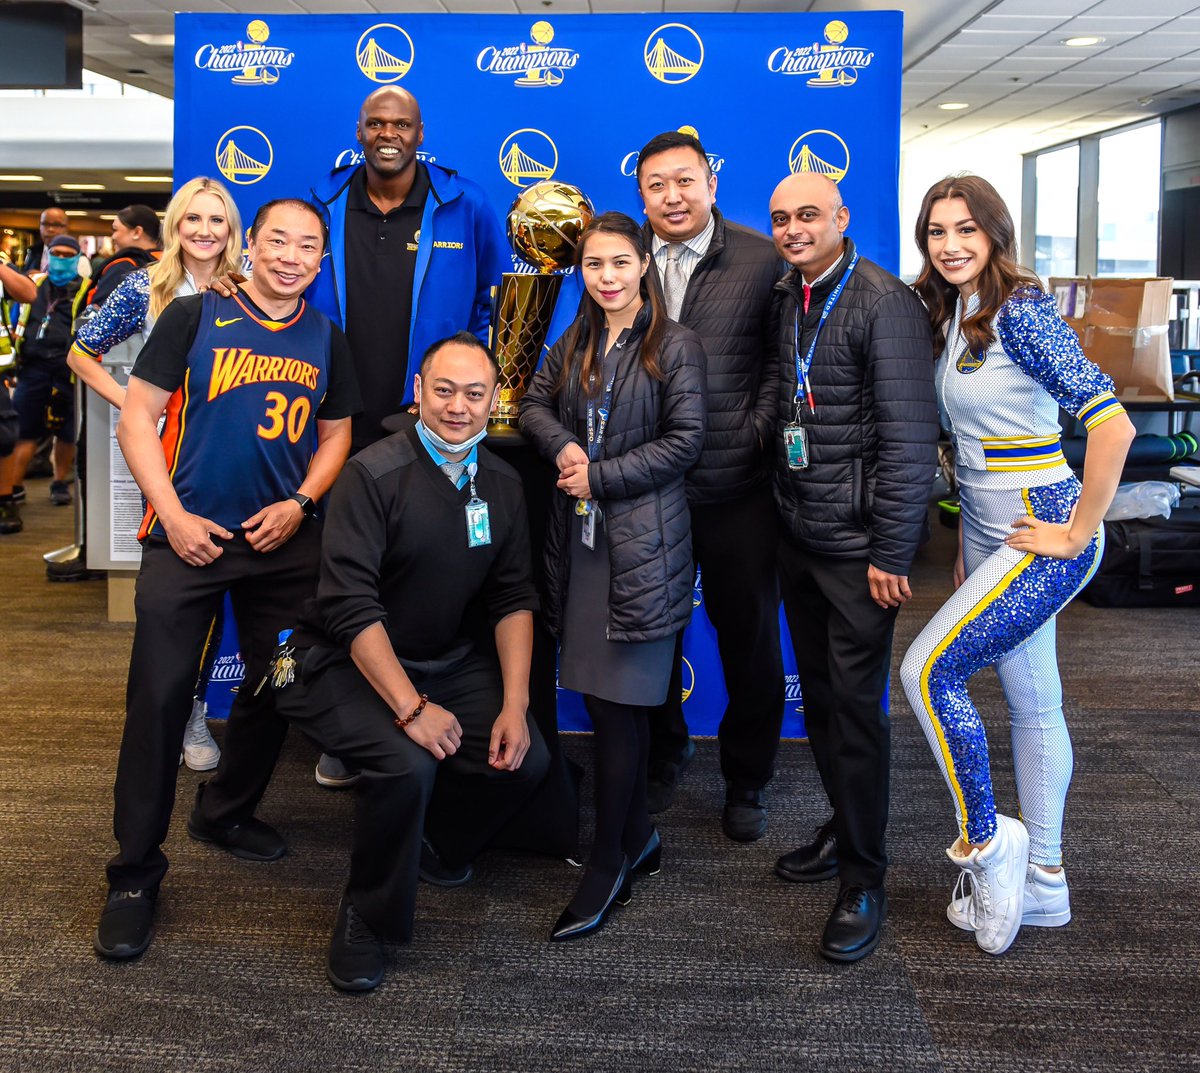 @Auggiie69 @sychew51 @annie54c SFO employees were happy that the Warriors championship trophy made an appearance at gate F12. They also loved seeing Adonal Foyle!! #wheregoodleadstheway #teamsfo